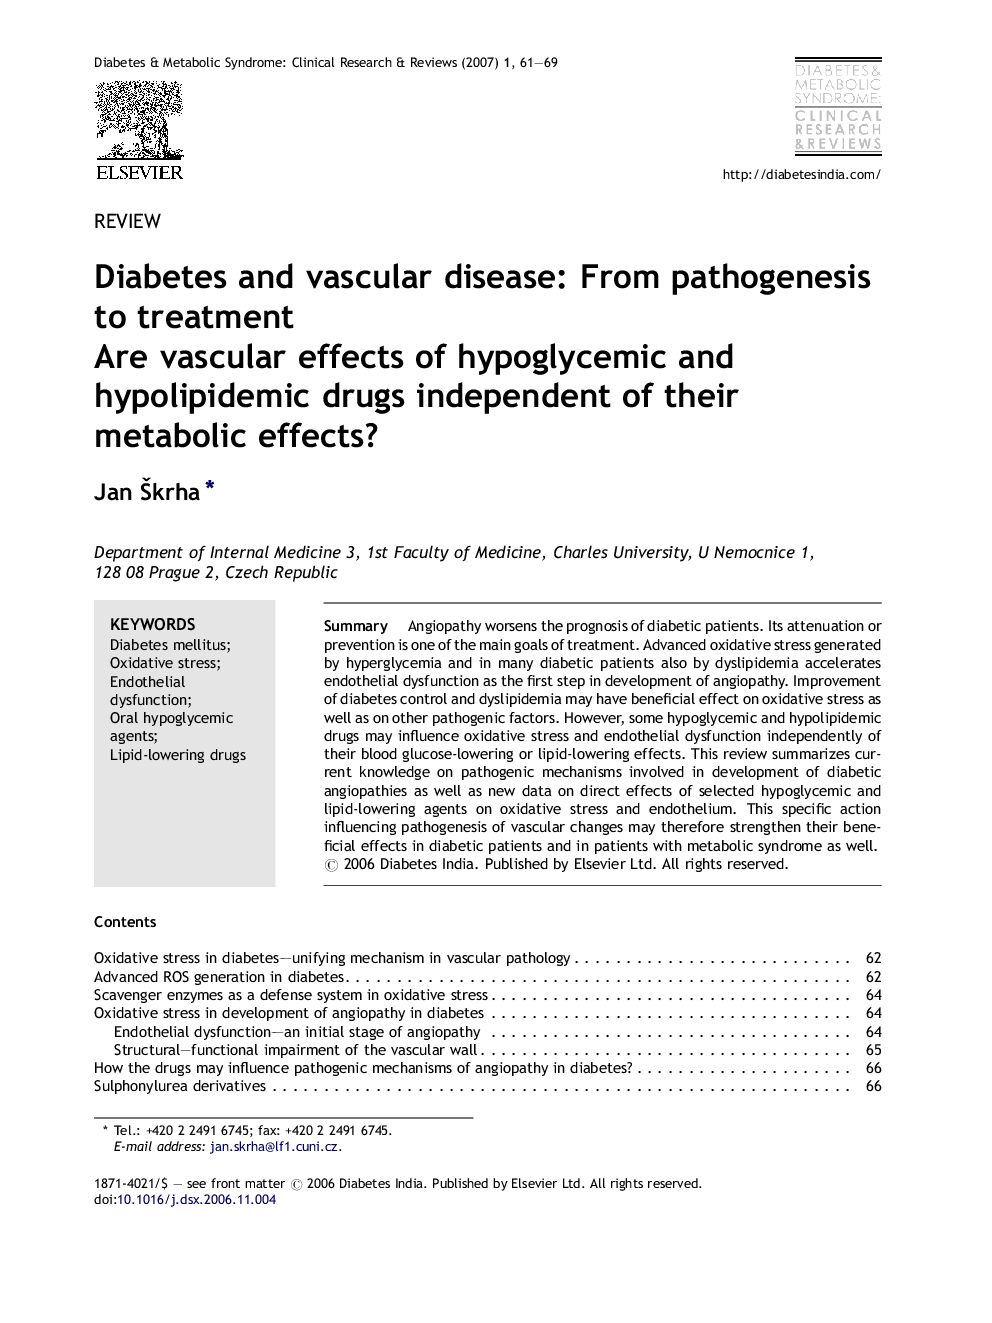 Diabetes and vascular disease: From pathogenesis to treatment: Are vascular effects of hypoglycemic and hypolipidemic drugs independent of their metabolic effects?